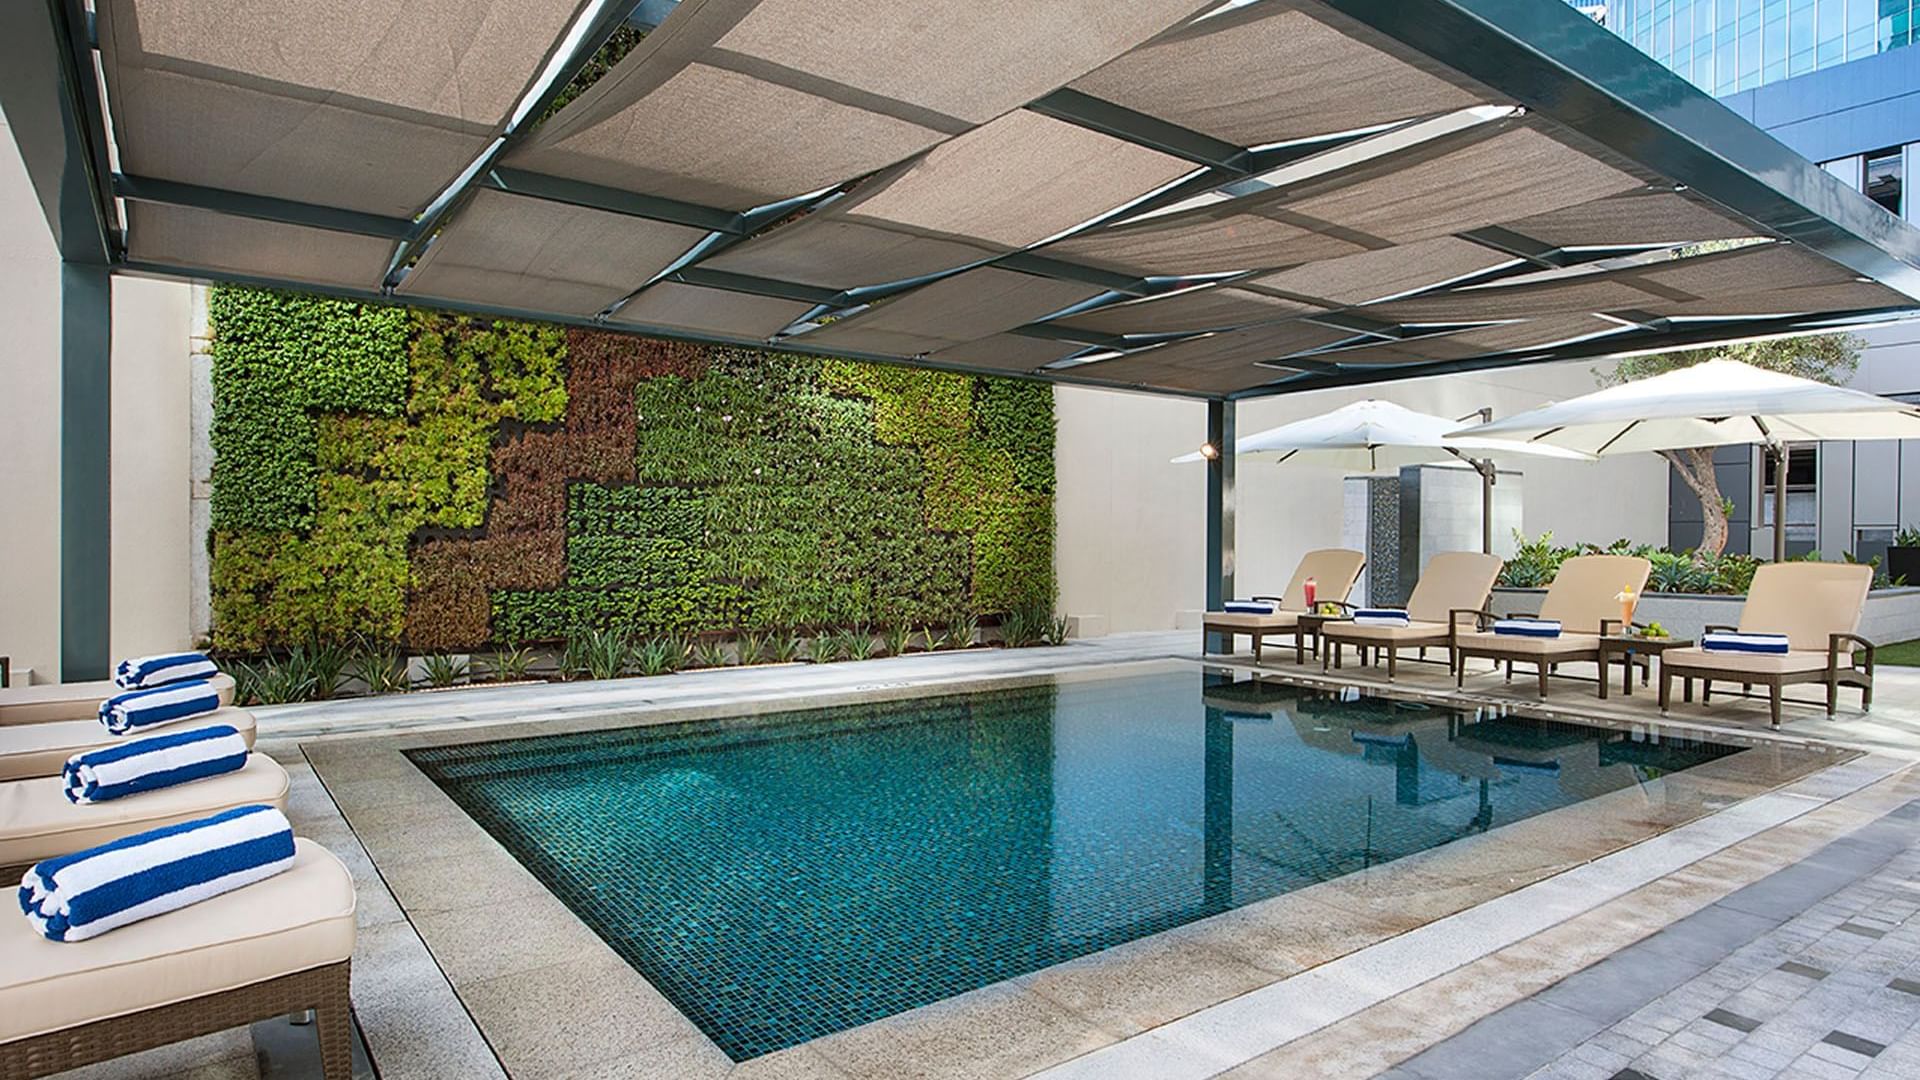 Pool area with lounge chairs & umbrellas set against a green wall at DAMAC Maison Cour Jardin